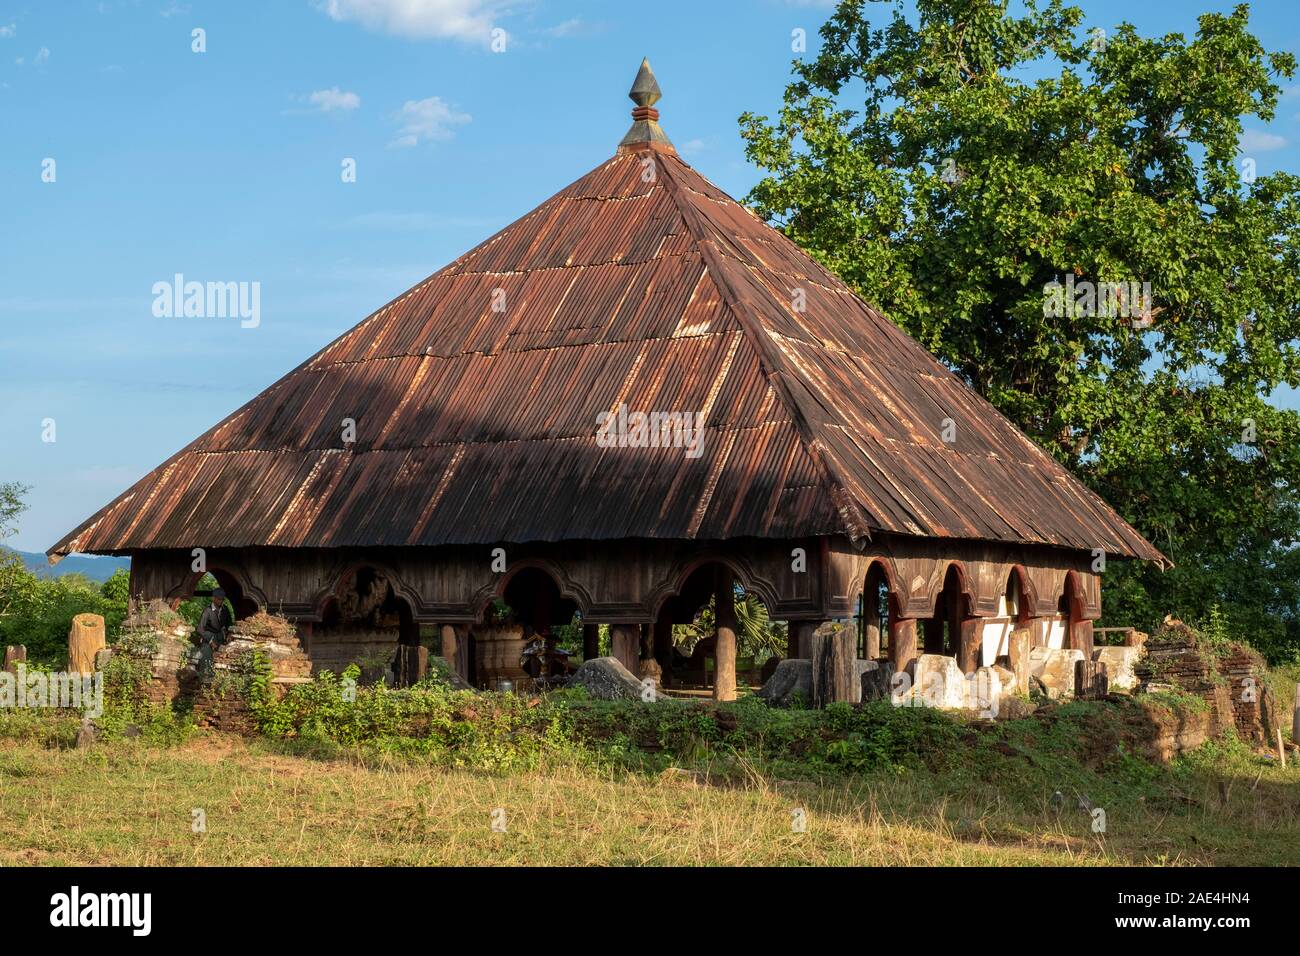 An arched ceremonial hall with tin roof of a Buddhist monastery for conducting religious rituals in a village in rural northwestern Myanmar (Burma) Stock Photo